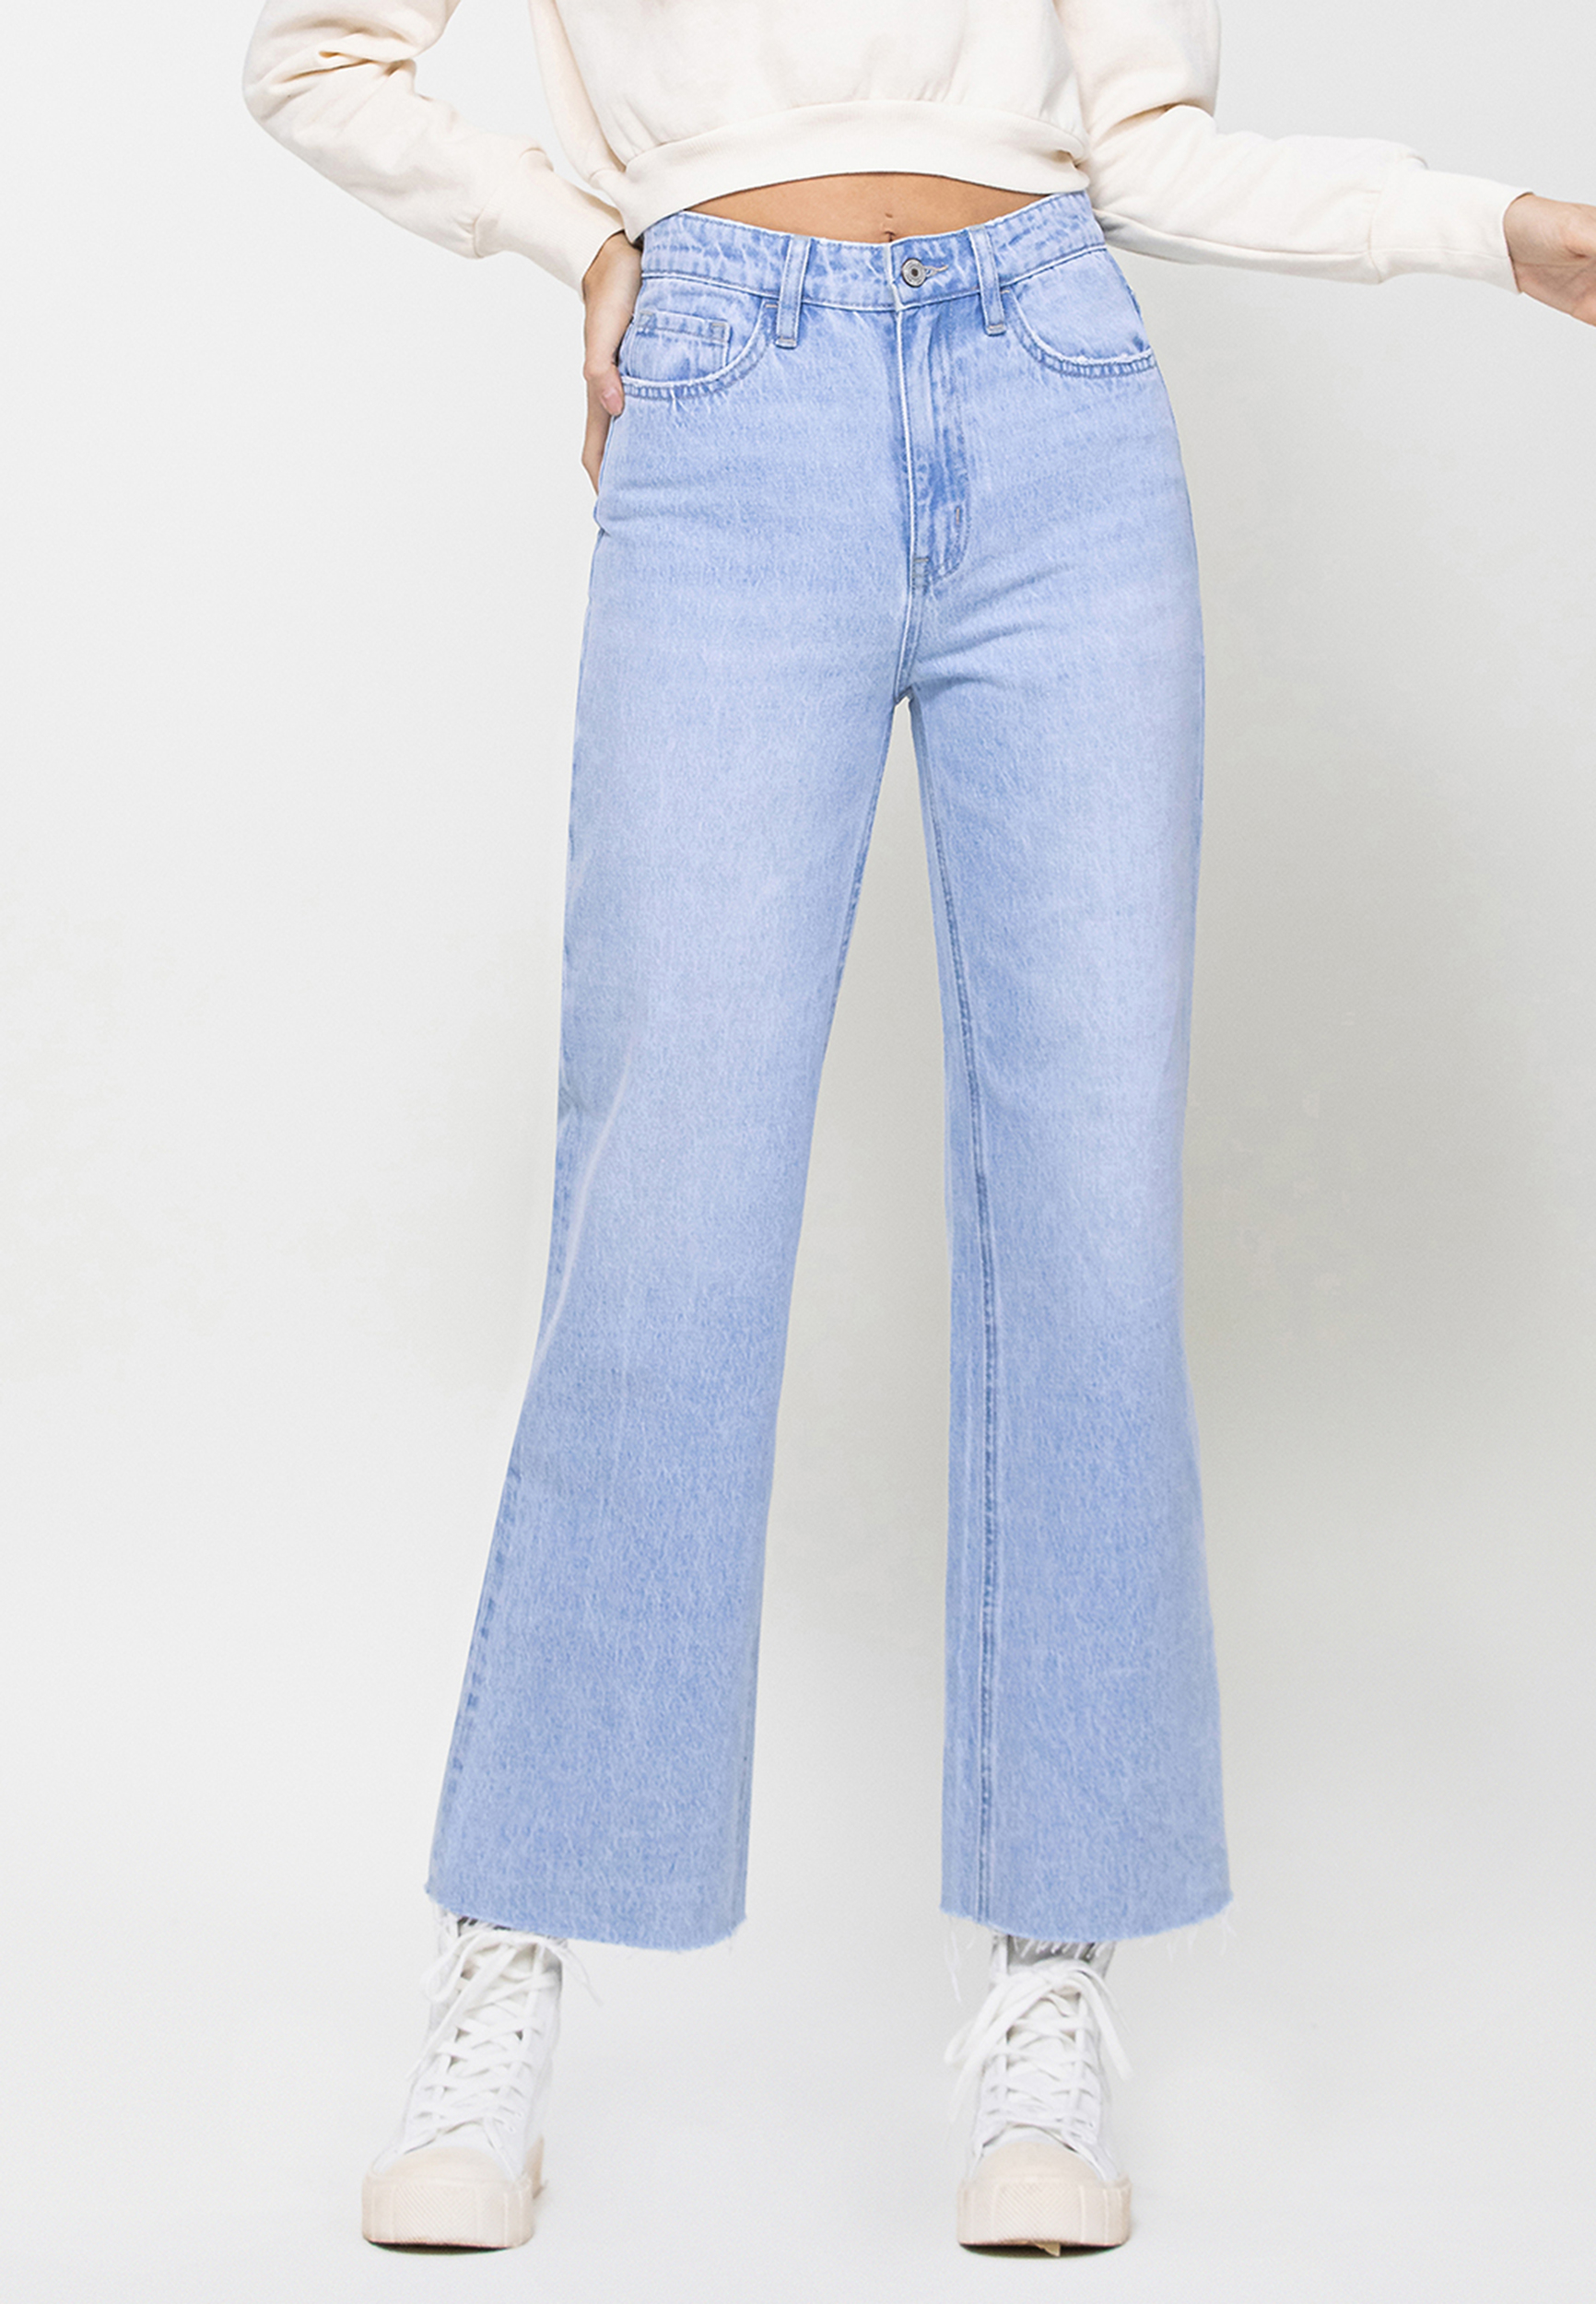 VERVET™ 90s Ankle Straight Nonstretch High Rise Jean | maurices